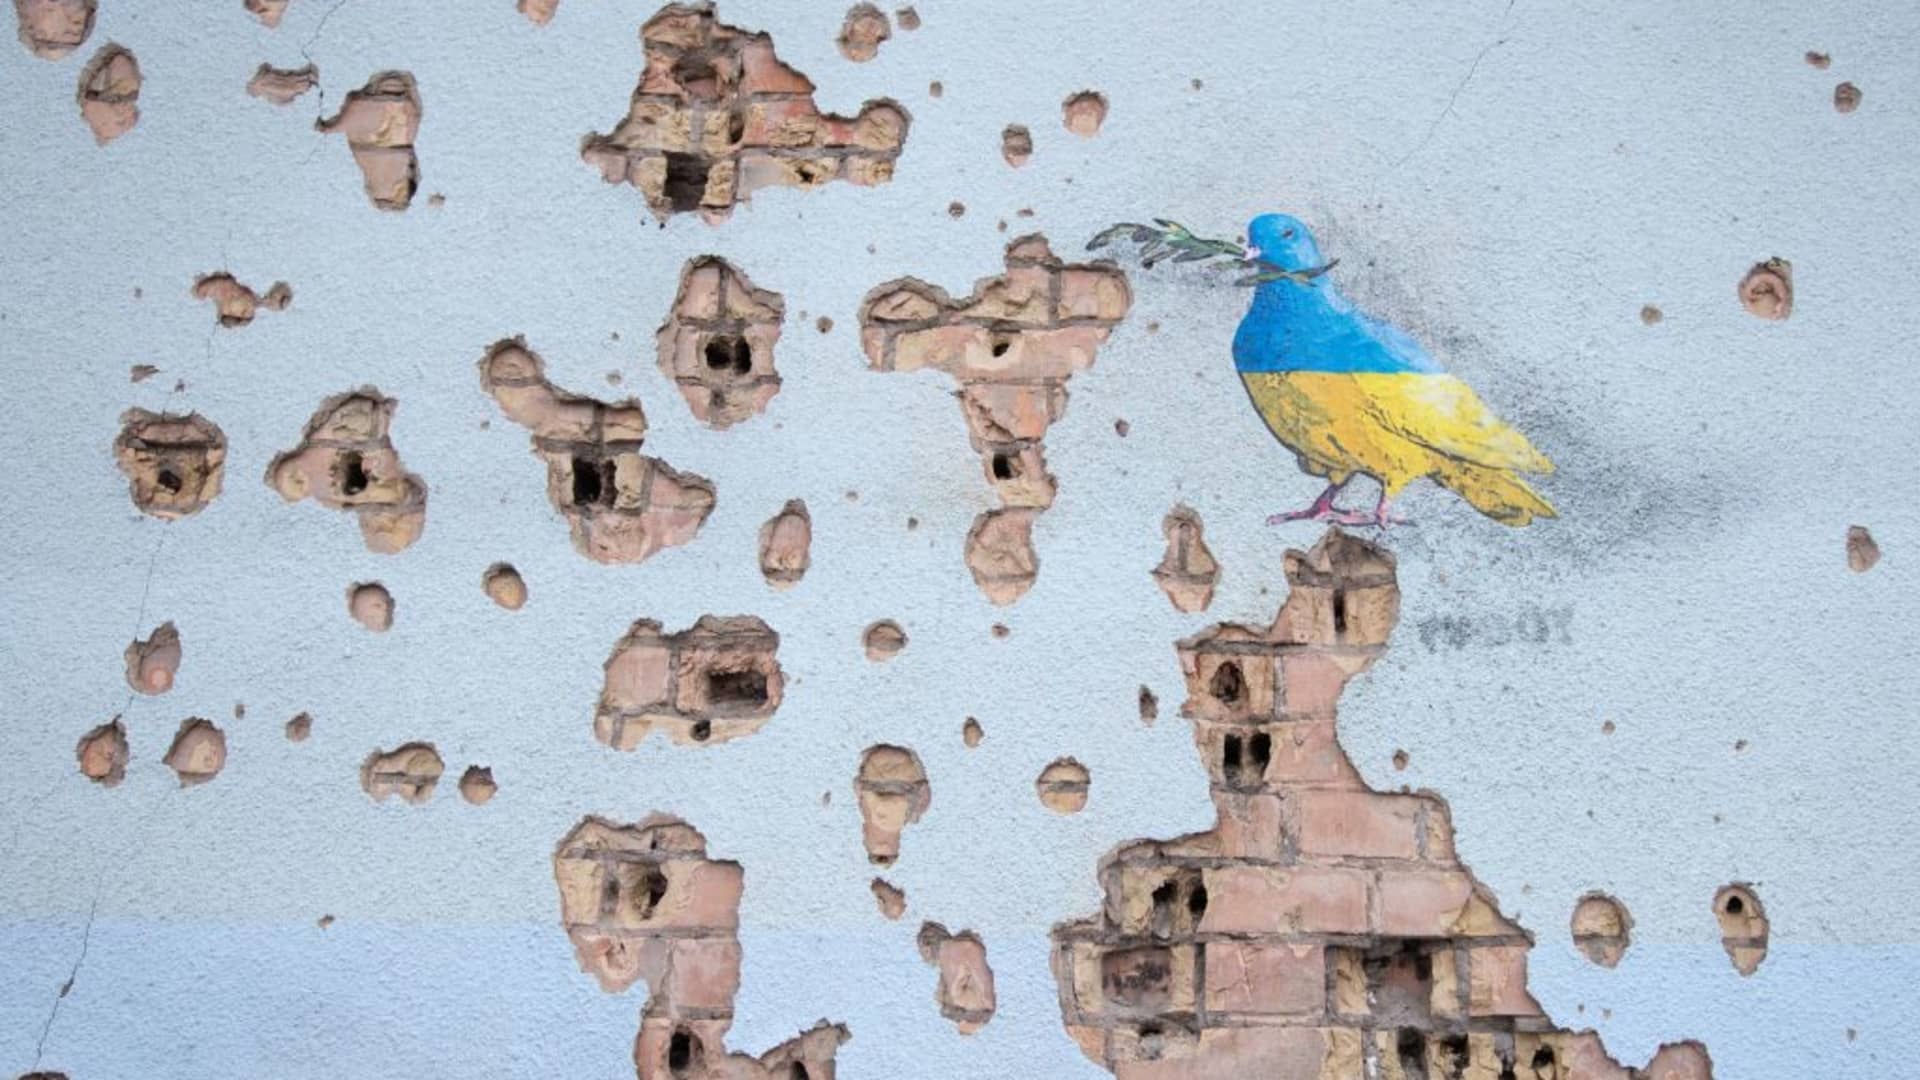 An artwork of the famous street artist Tvboy is seen on a wall of the House of Culture, which was heavily damaged during Russia's attack on Ukraine, in the town of Irpin near Kyiv, Ukraine, February 2, 2023. 